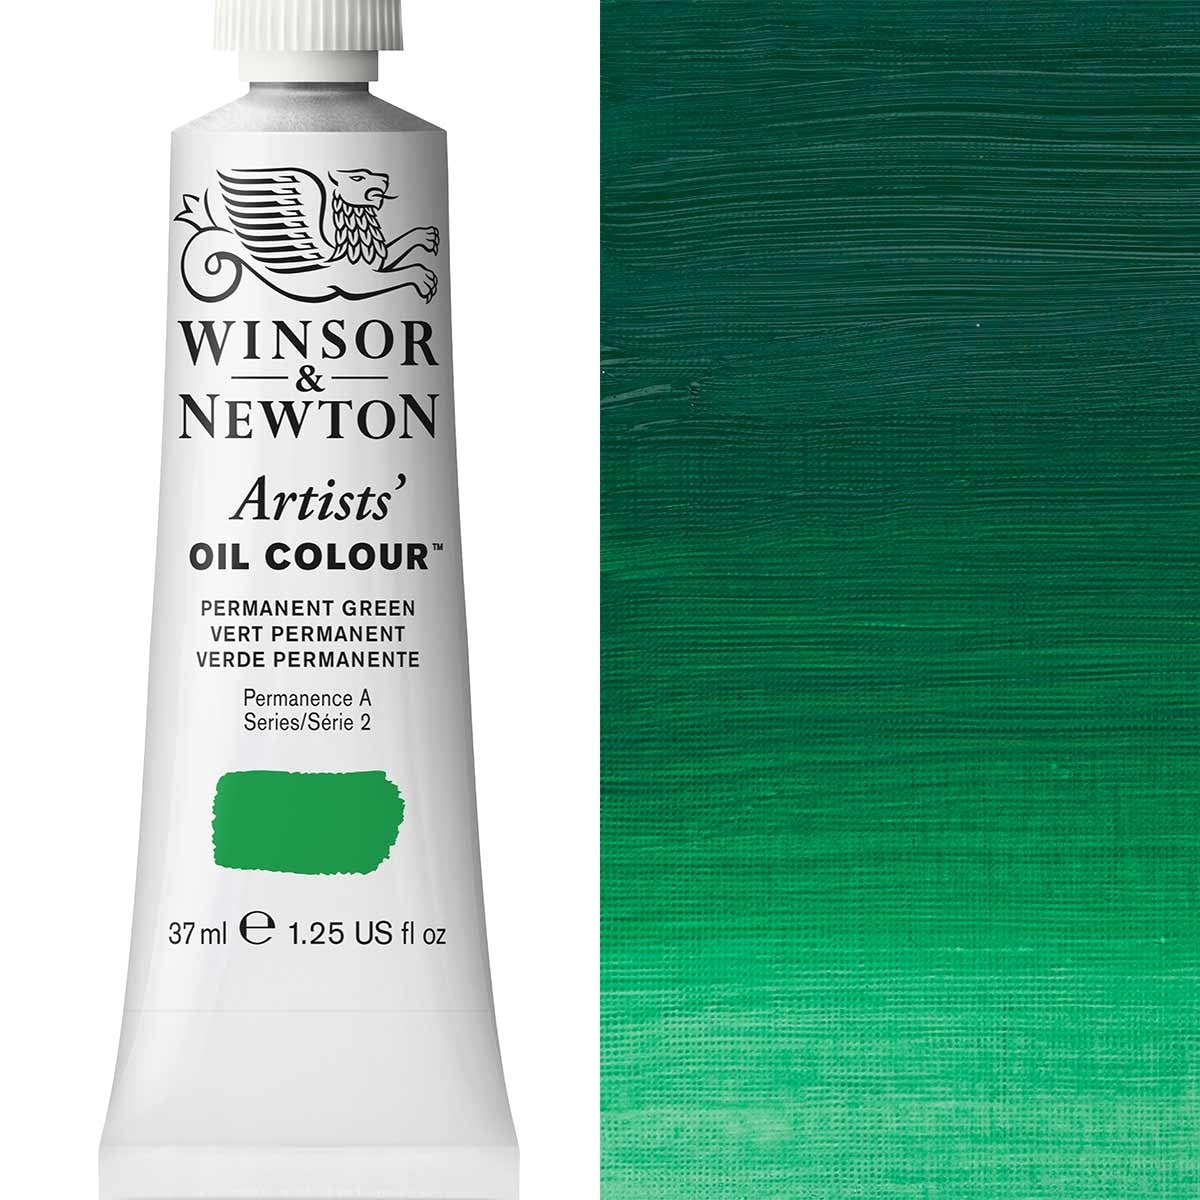 Winsor and Newton - Artists' Oil Colour - 37ml - Permanent Green